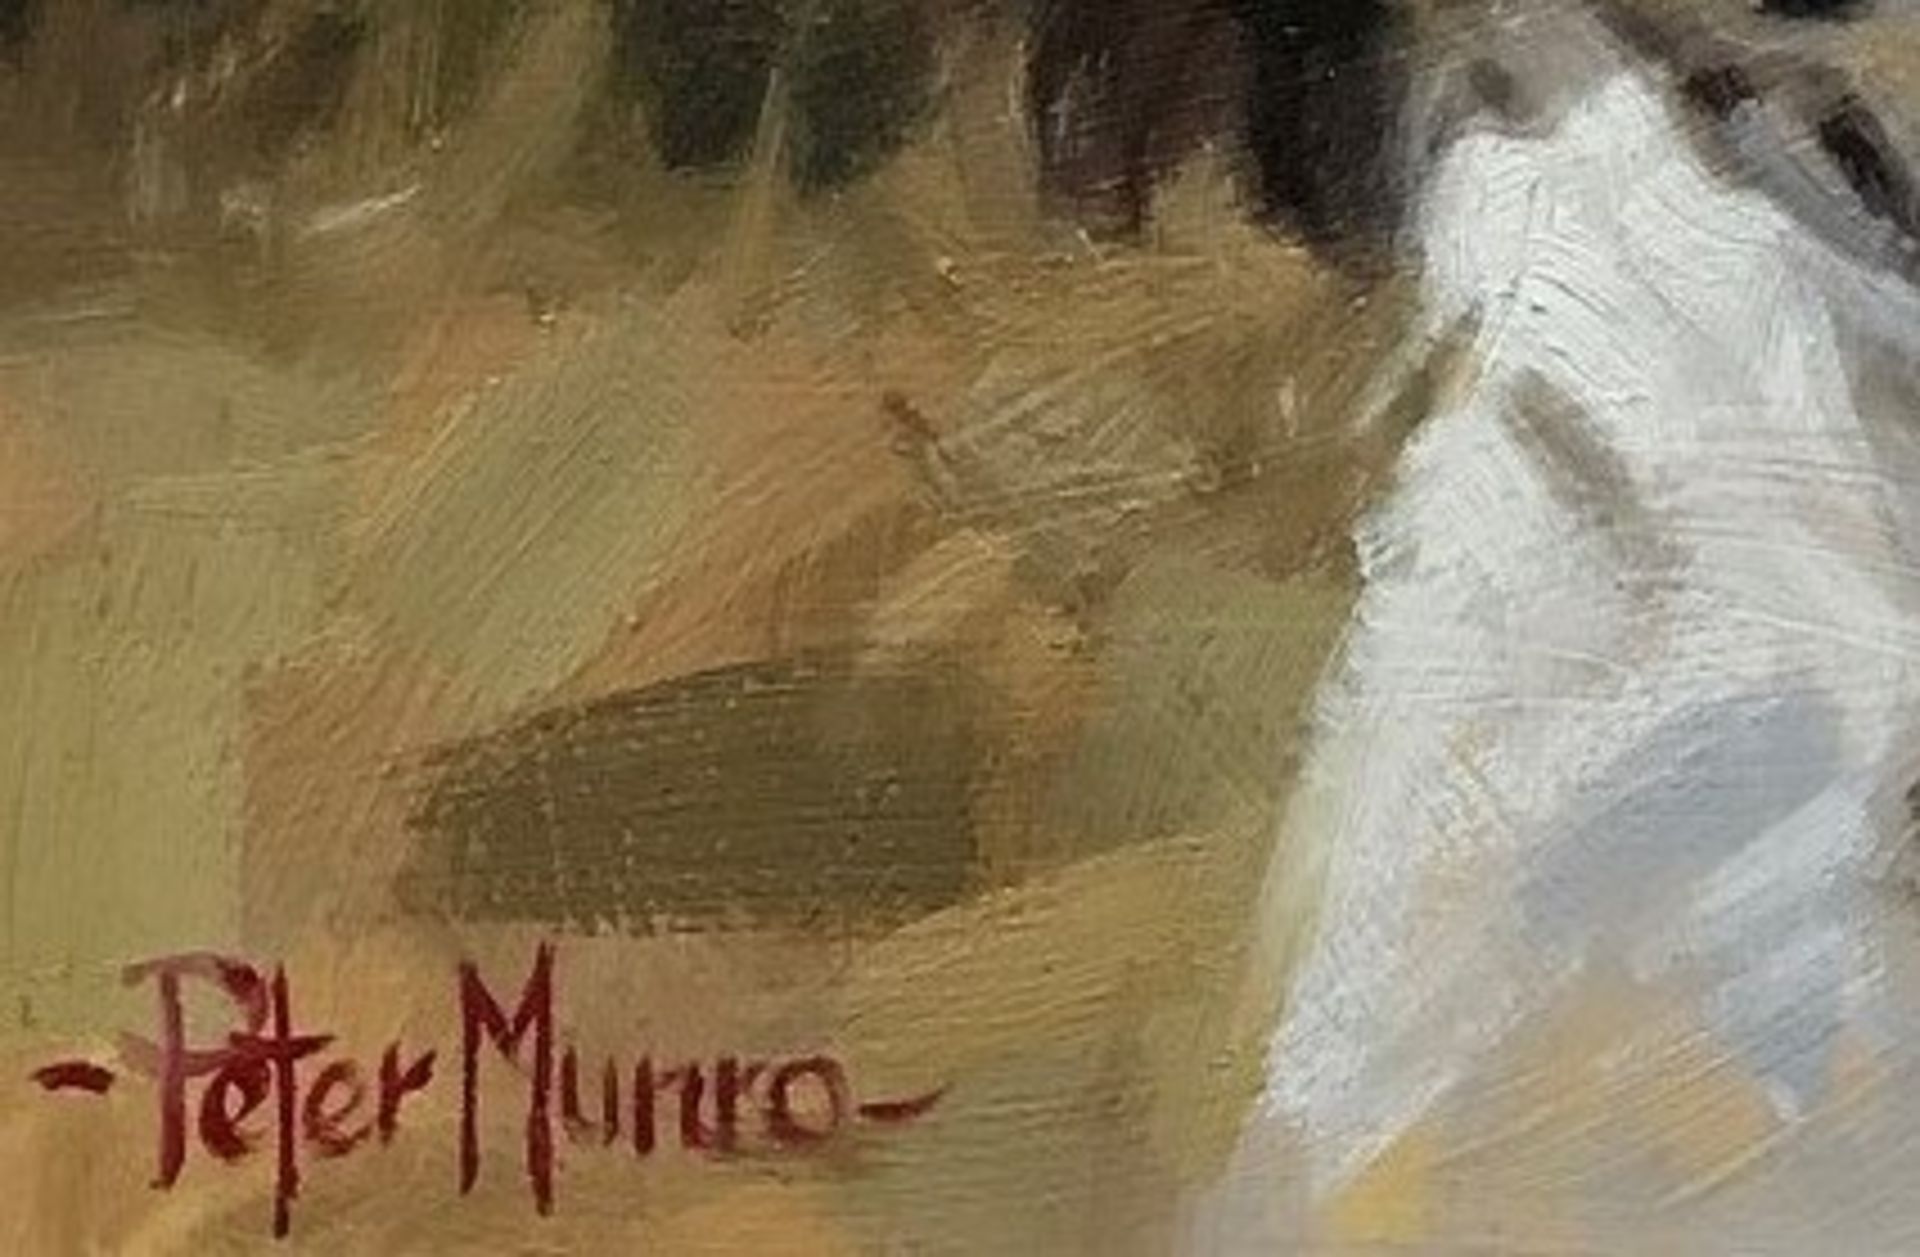 Signed Oil Painting By Peter Munro  " Spaniel" - Image 3 of 3